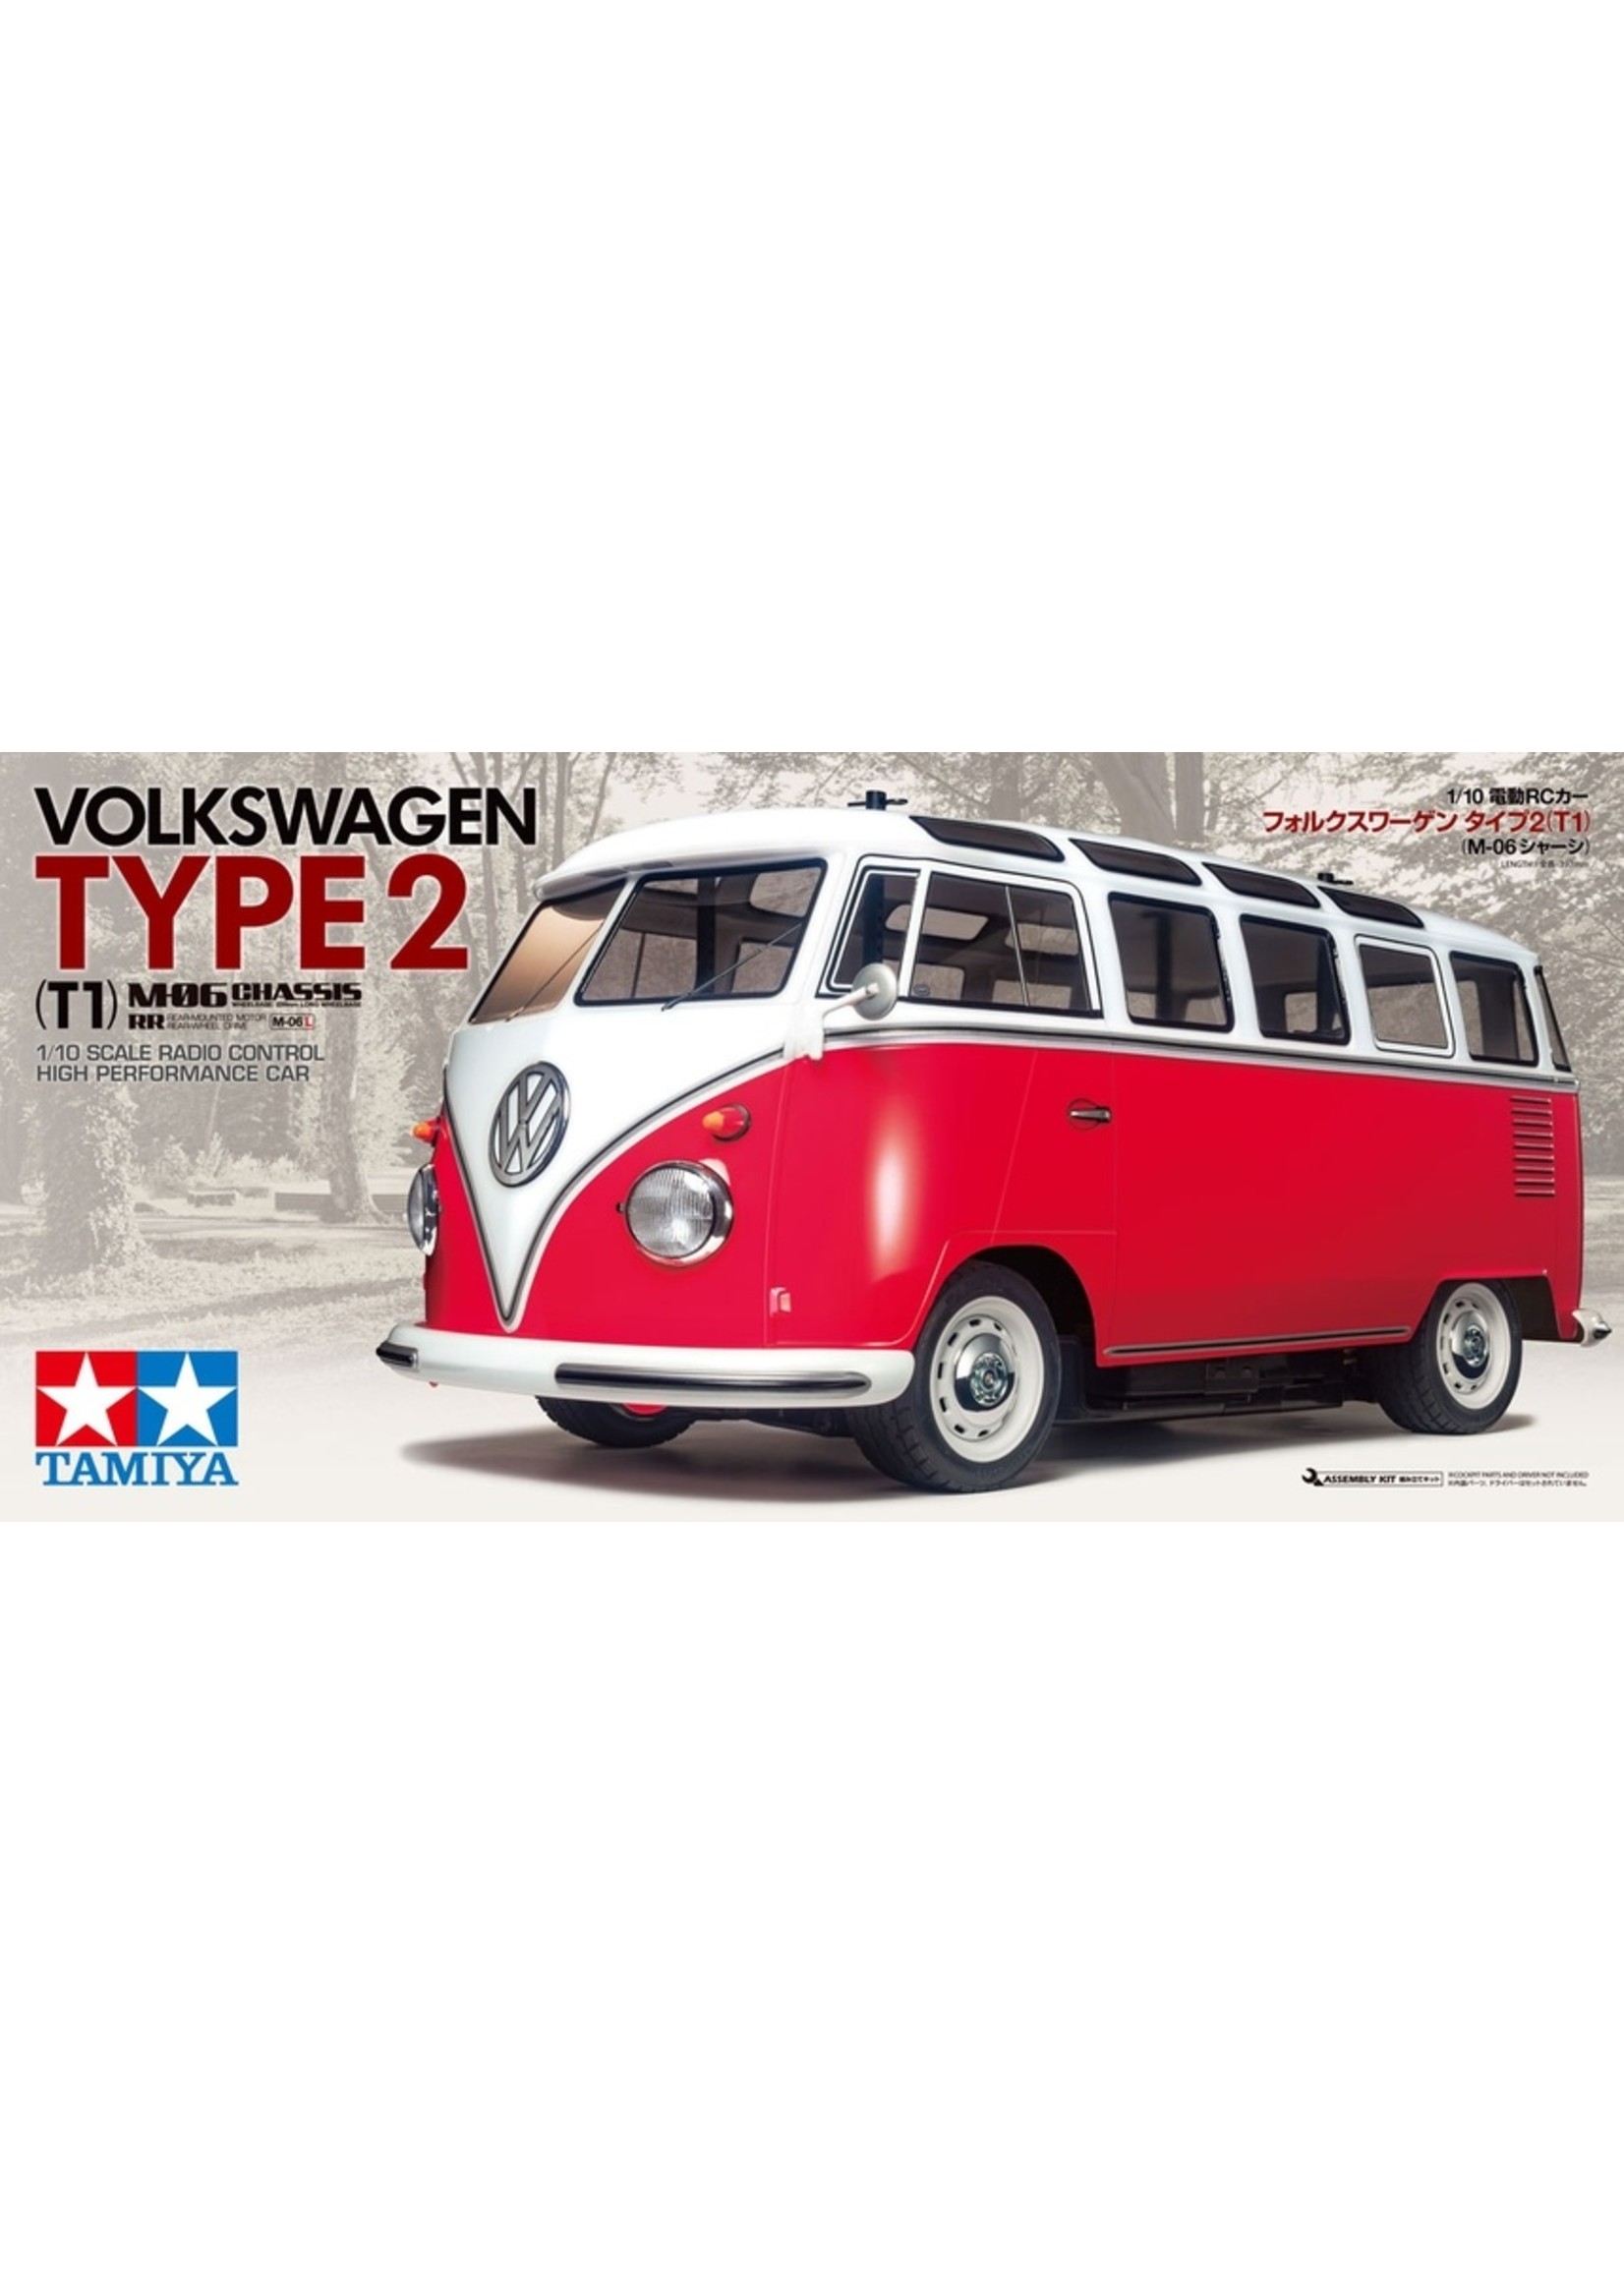 Tamiya 1/10 Volkswagen Bus Type 2 T1 with HobbyWing ESC - M-06 Chassis